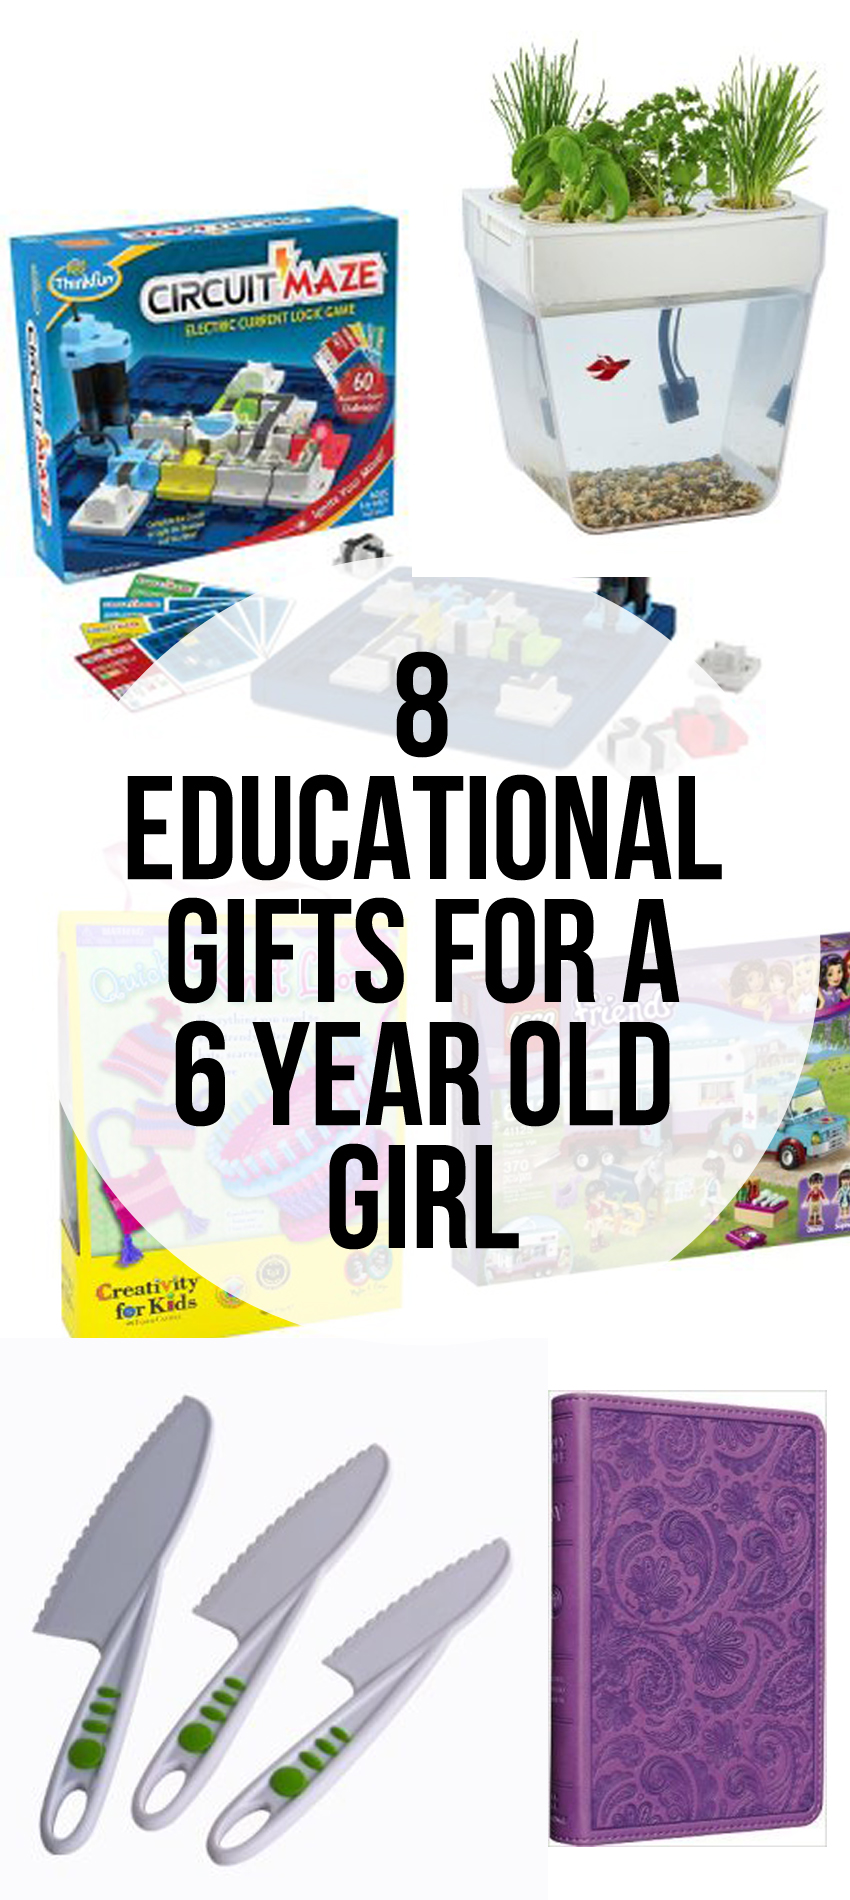 Gift Guide - 8 Educational Gifts to get for a 6 Year Old Girl